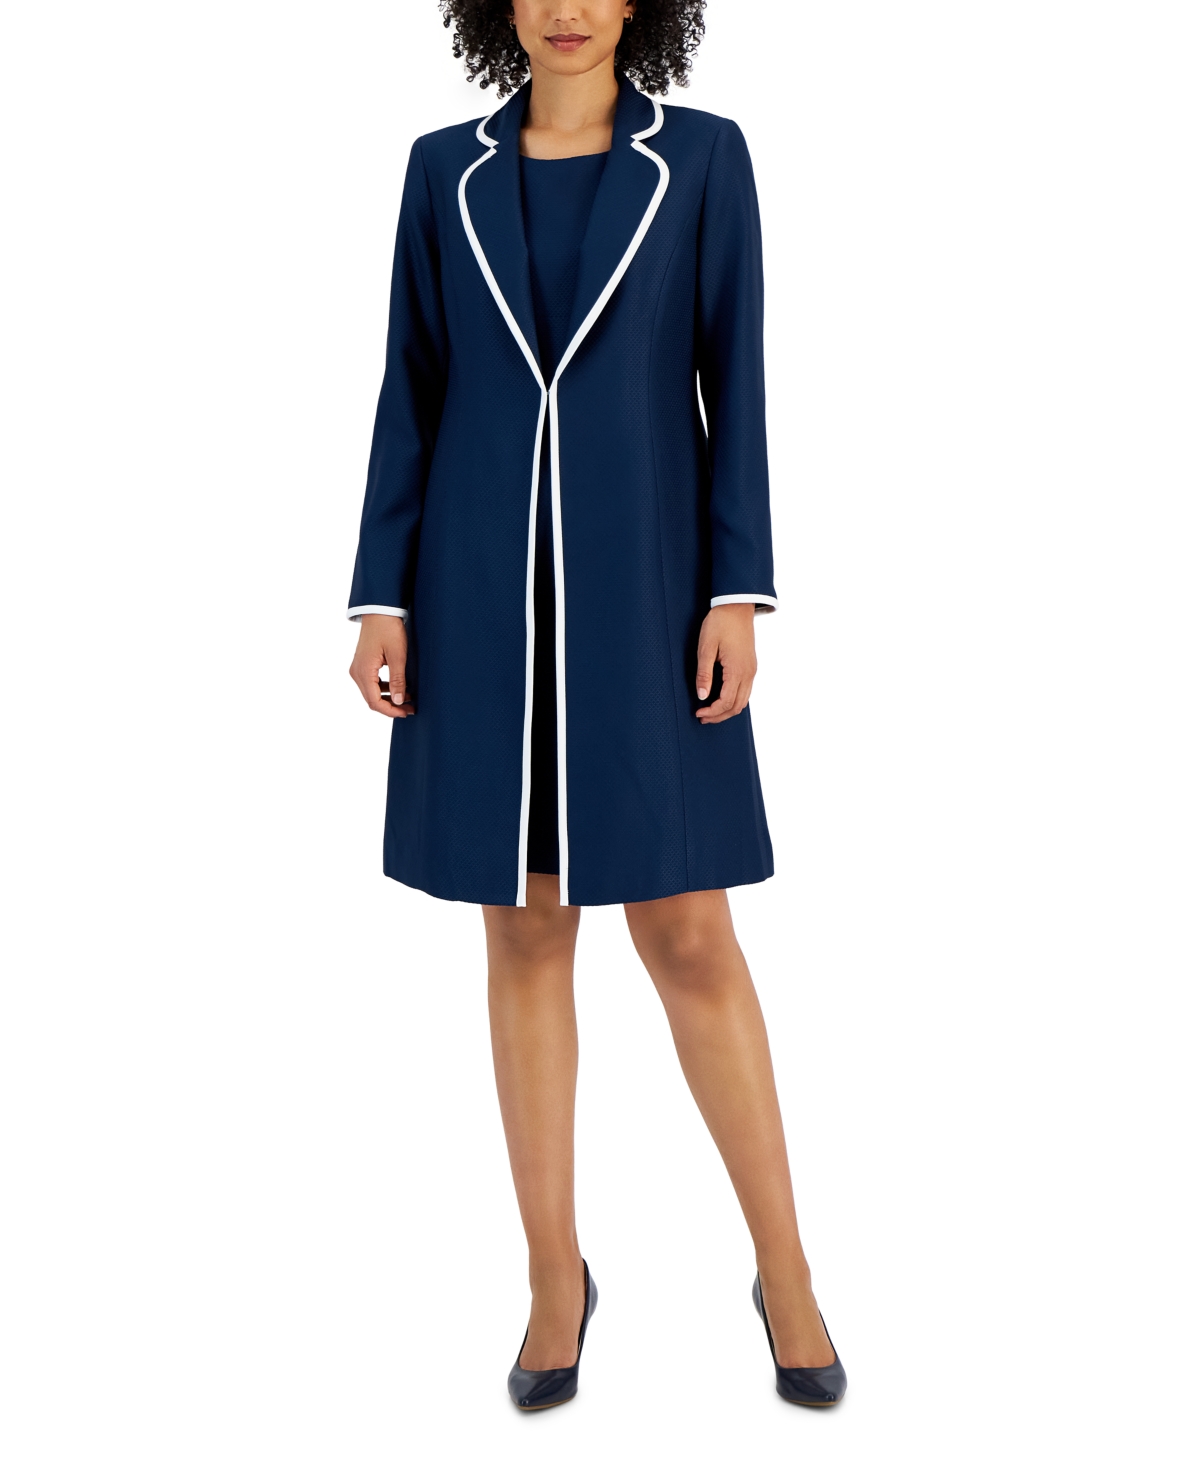 Le Suit Jacquard Framed Sheath Dress Suit, Available Regular And Petite Sizes In Navy,natural White